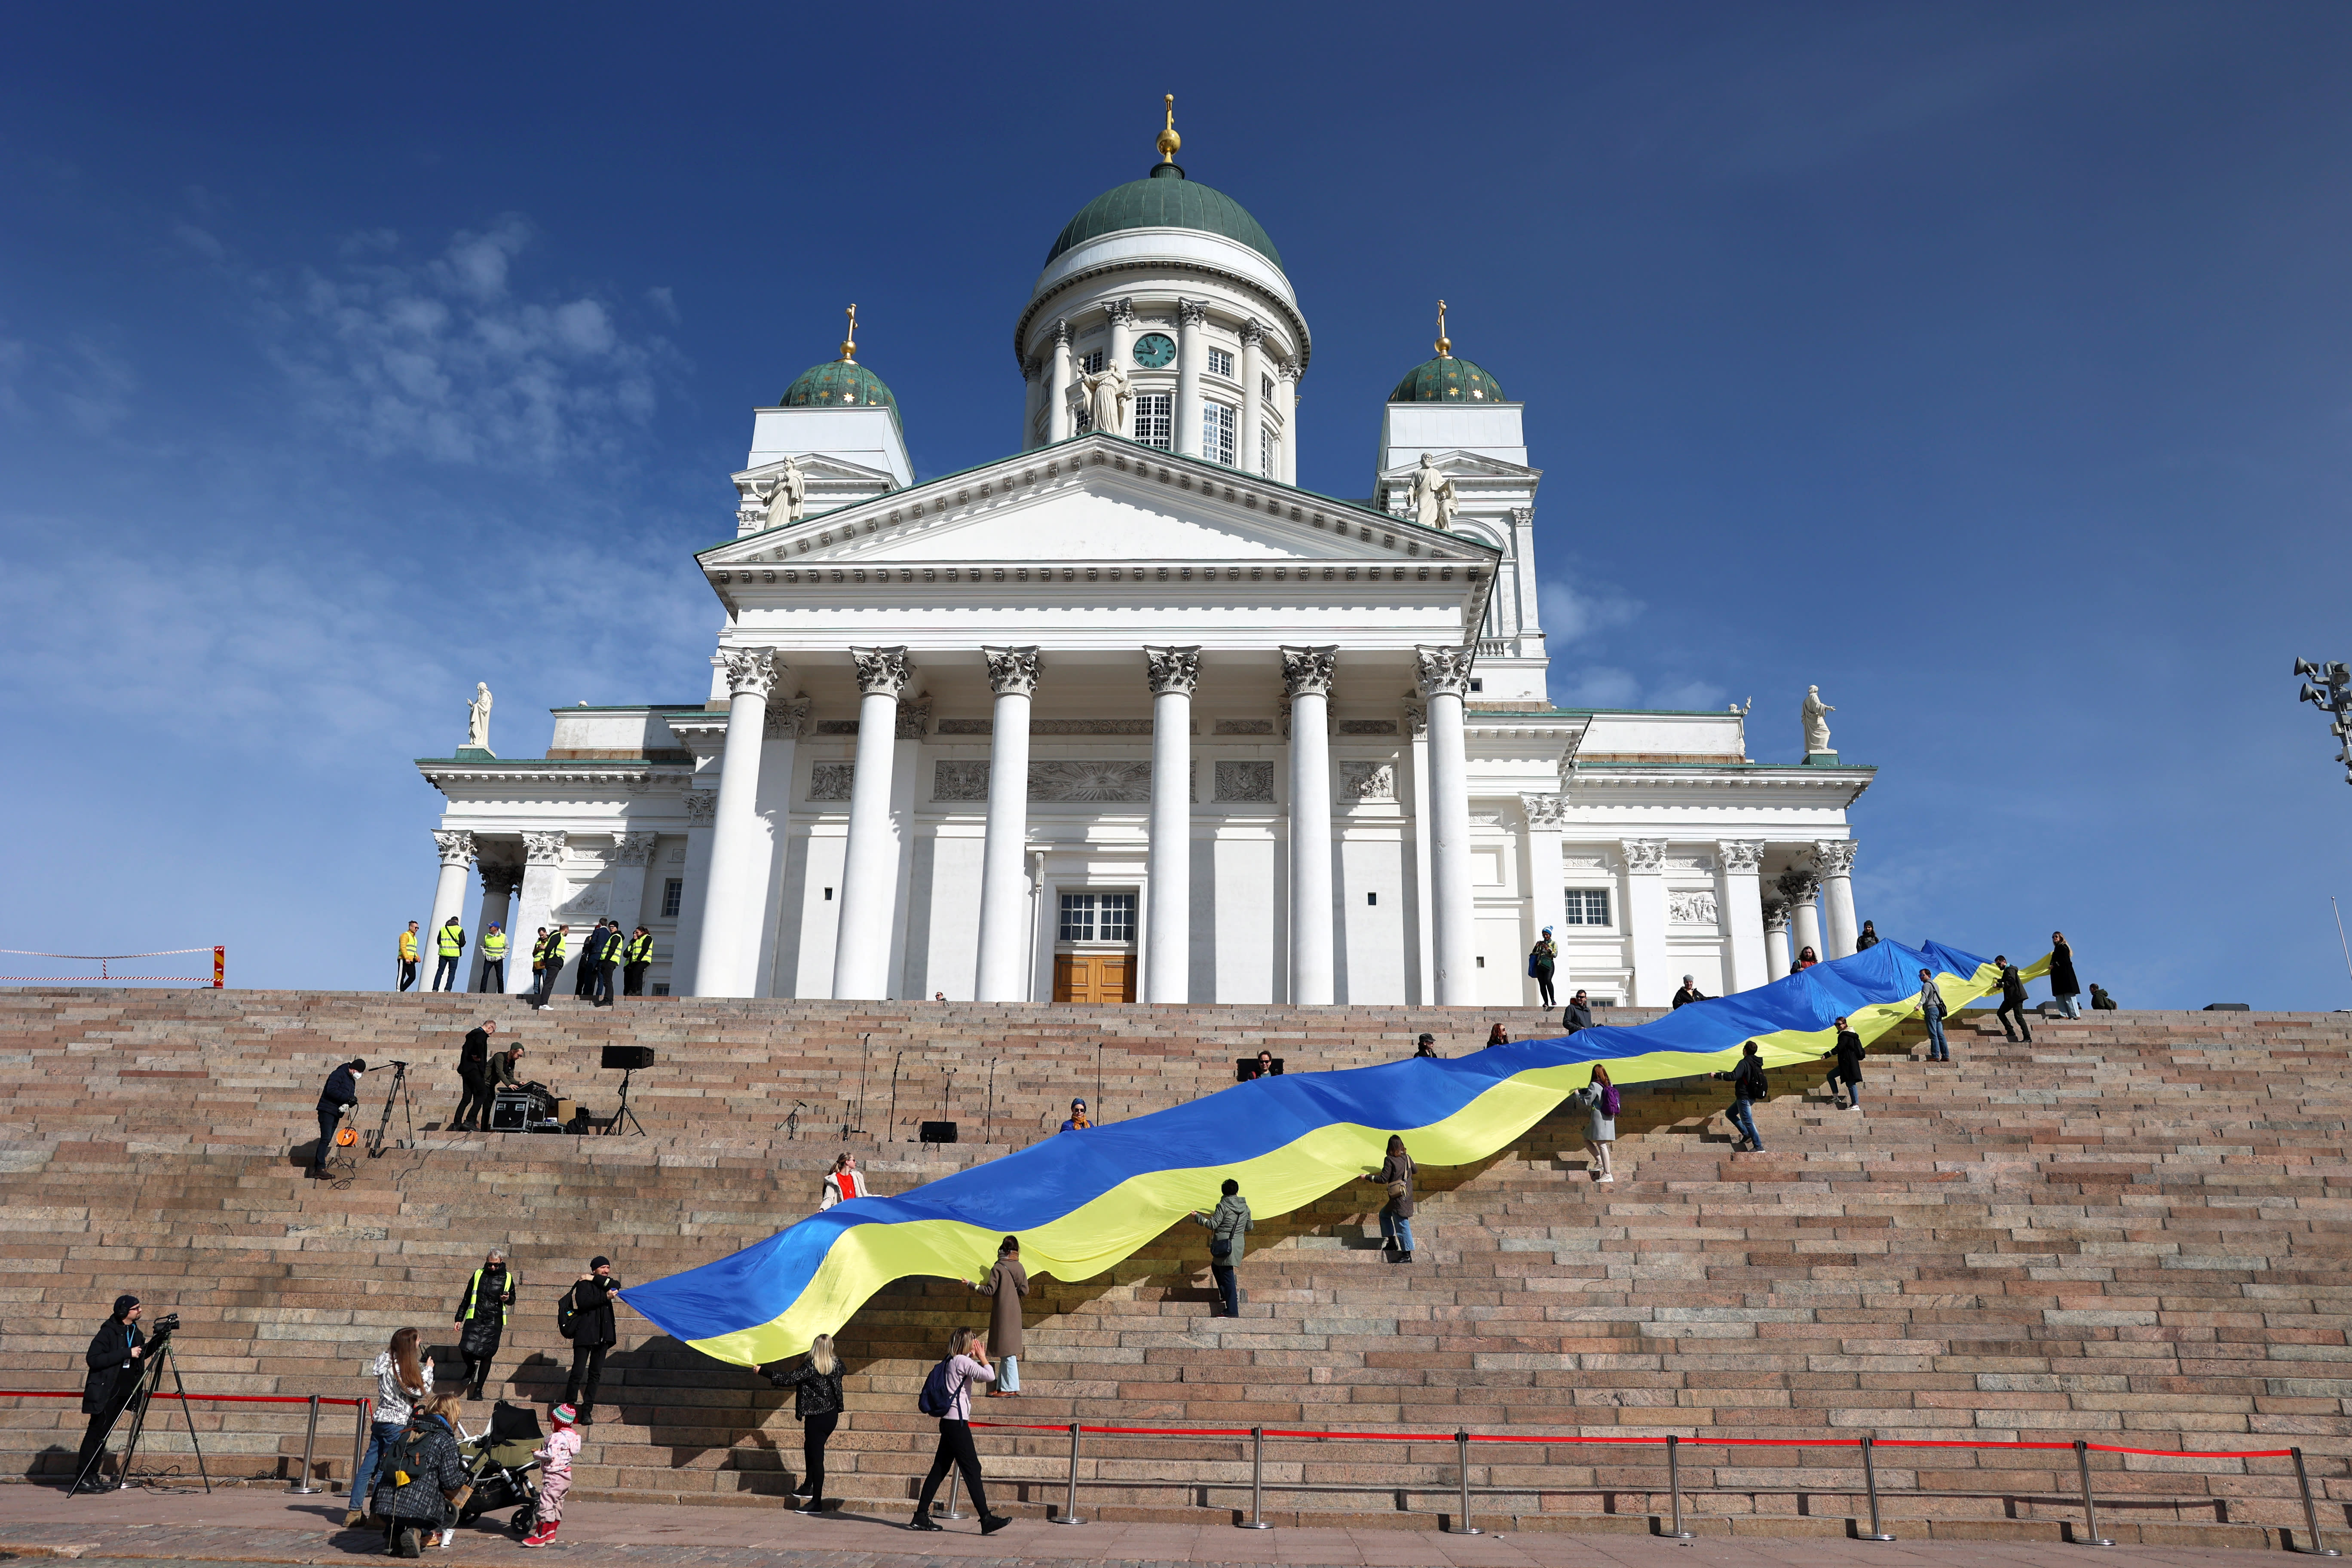 The Foreign Minister, the Ambassador, spoke at a pro-Ukraine event in Helsinki